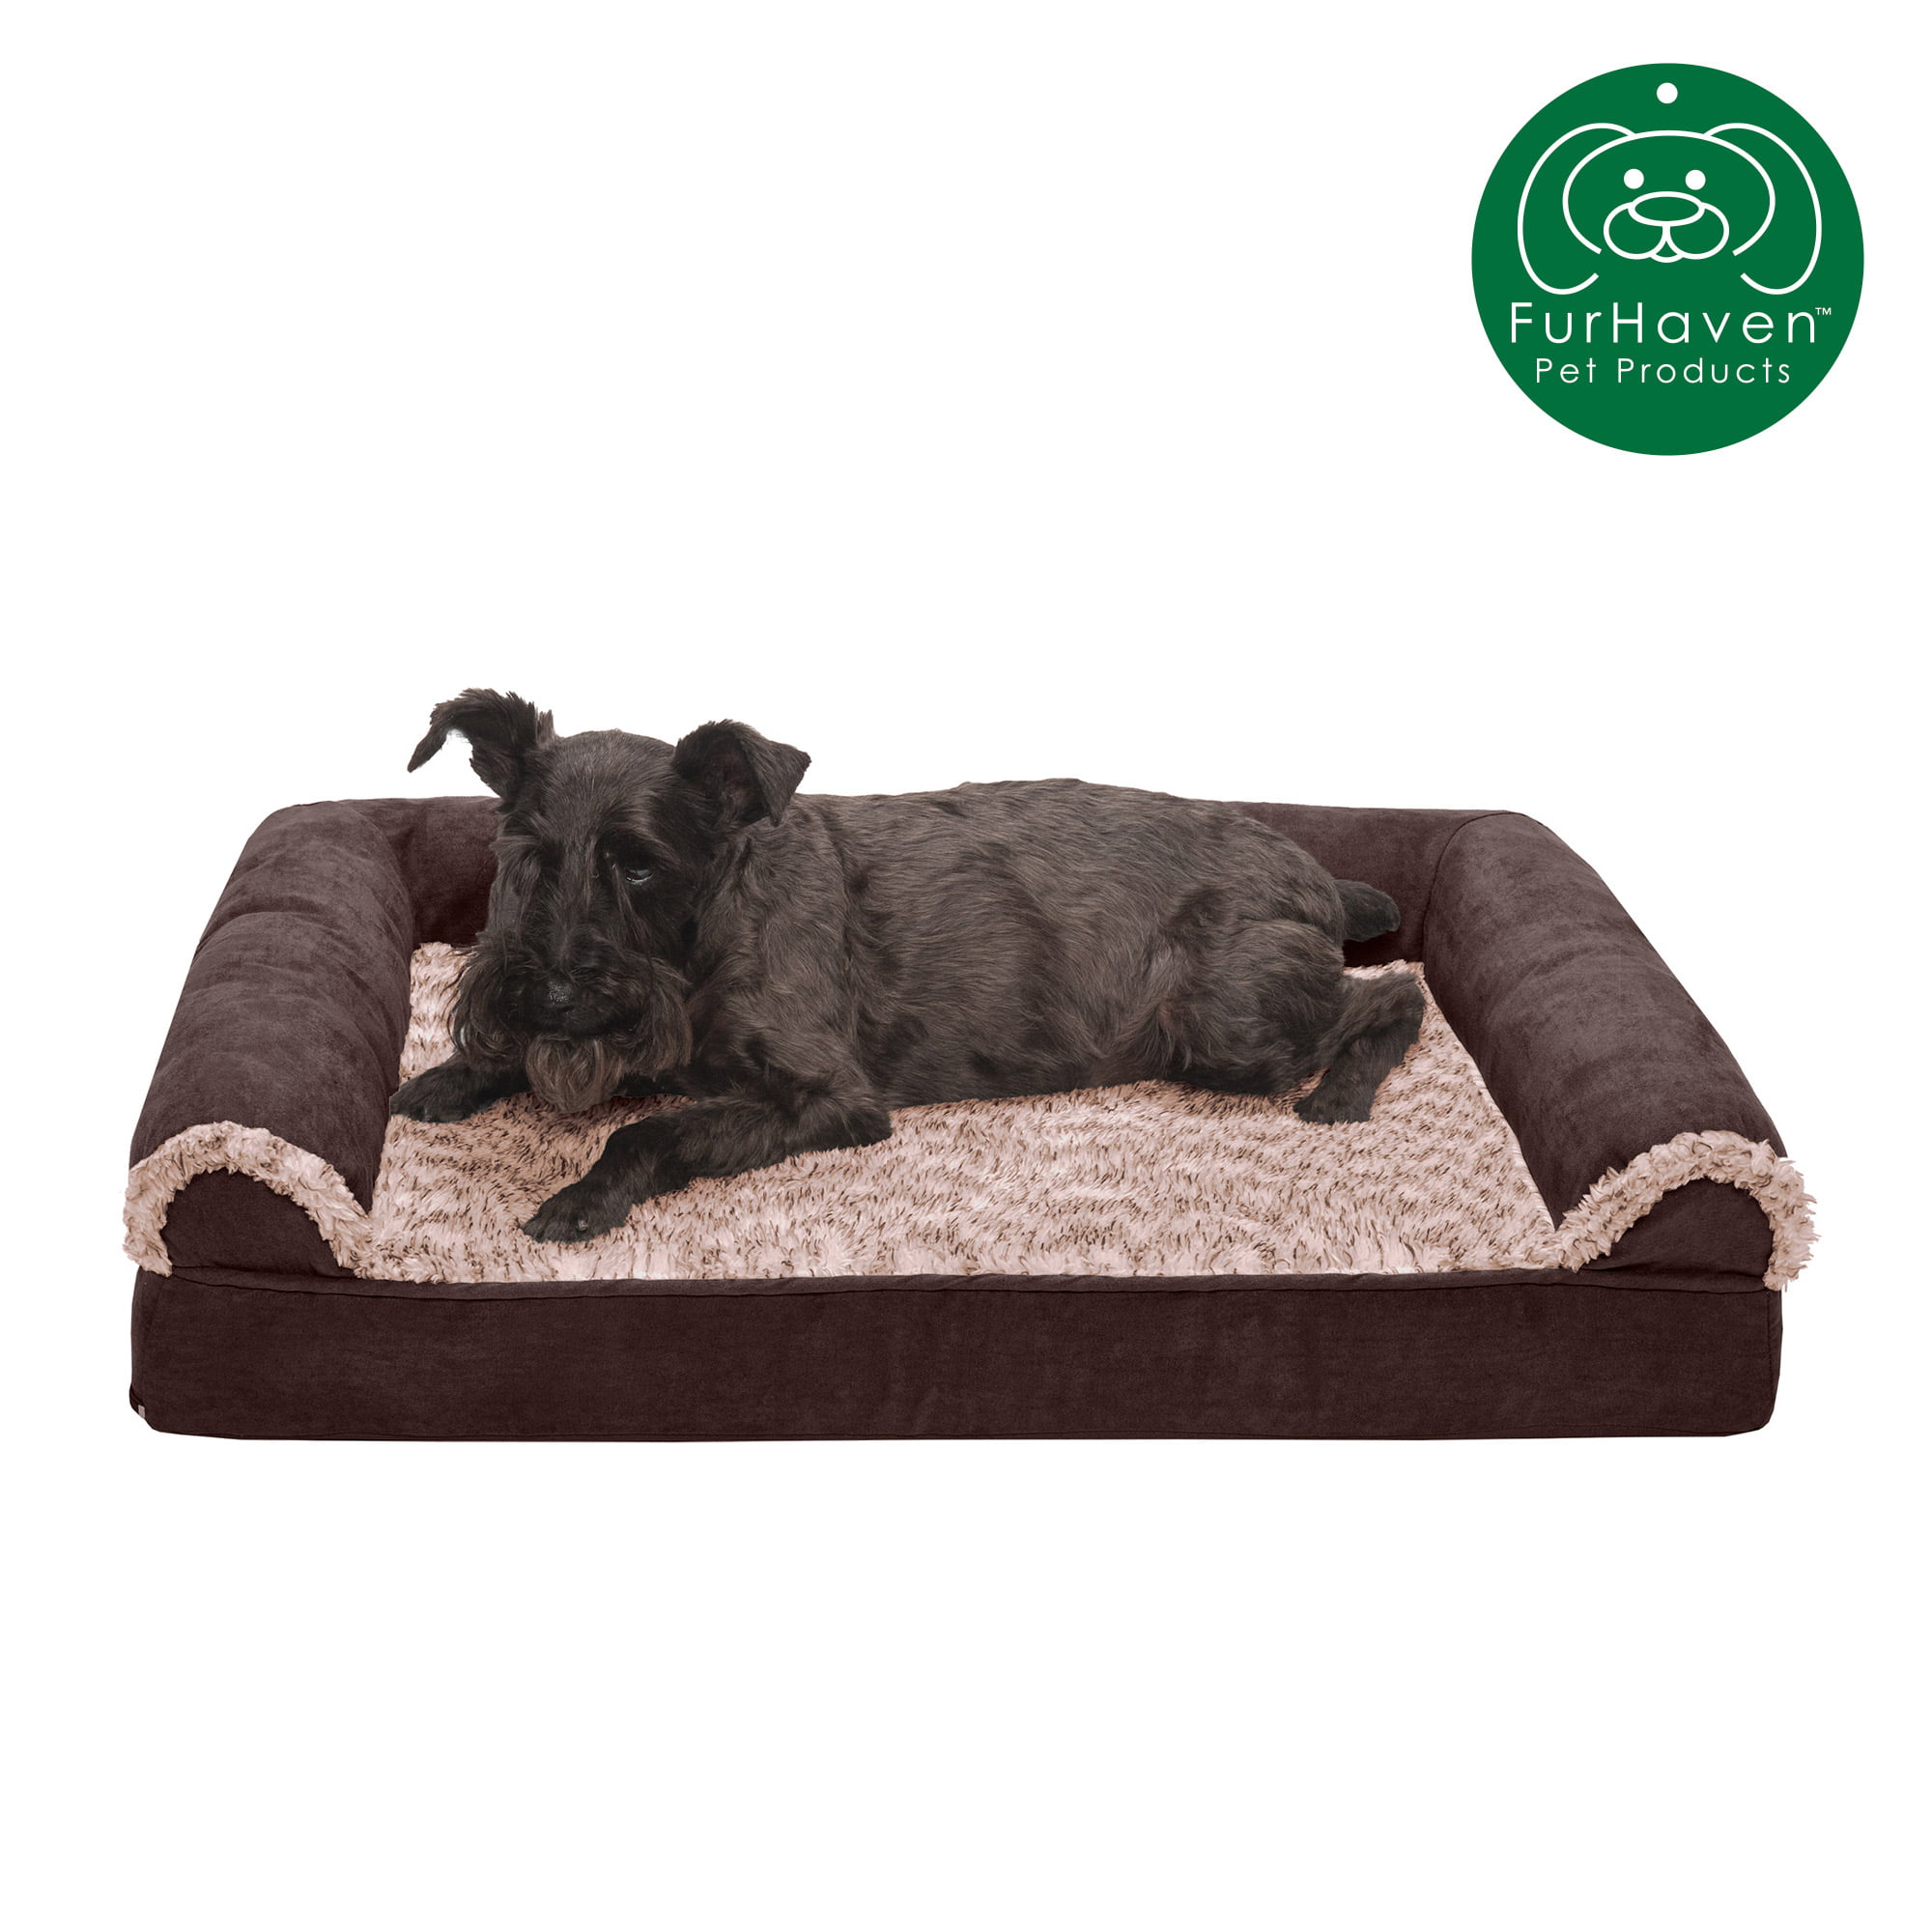 Available in Multiple Colors & Styles Round Oval Cuddler Nest Lounger Pet Bed for Dogs & Cats Furhaven Pet Dog Bed 